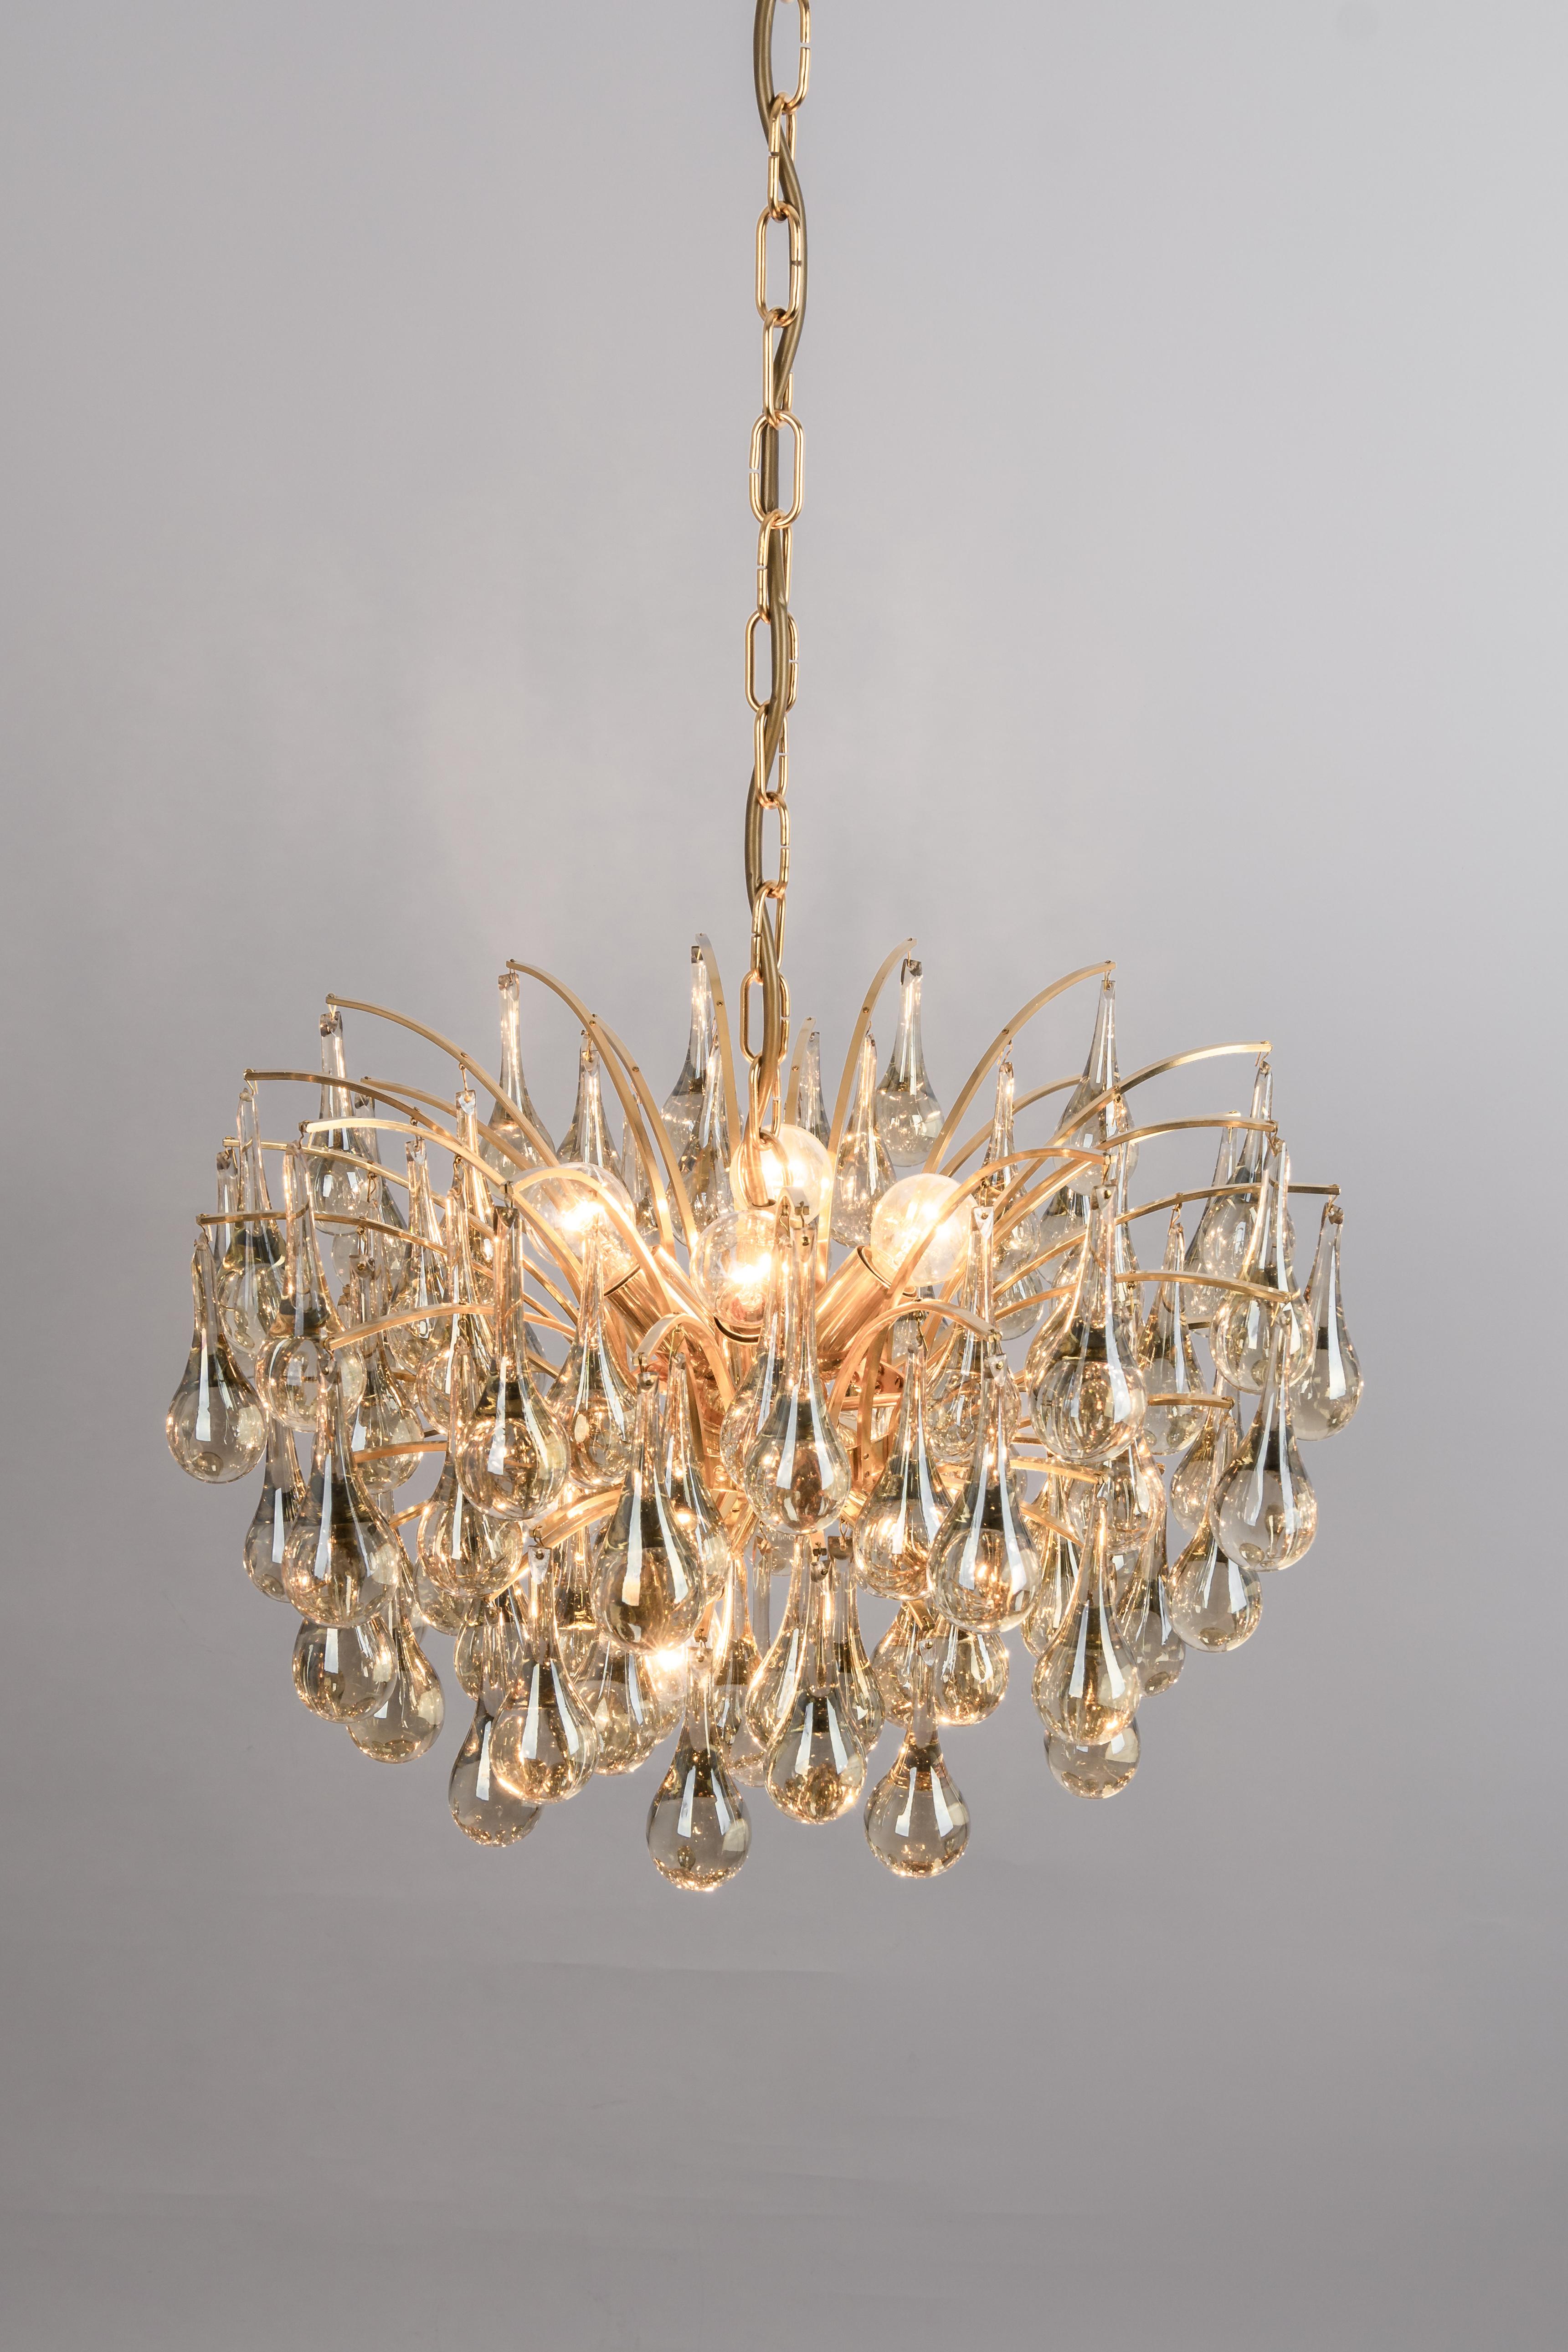 Large Murano Glass Tear Drop Chandelier, Christoph Palme, Germany, 1970s For Sale 4